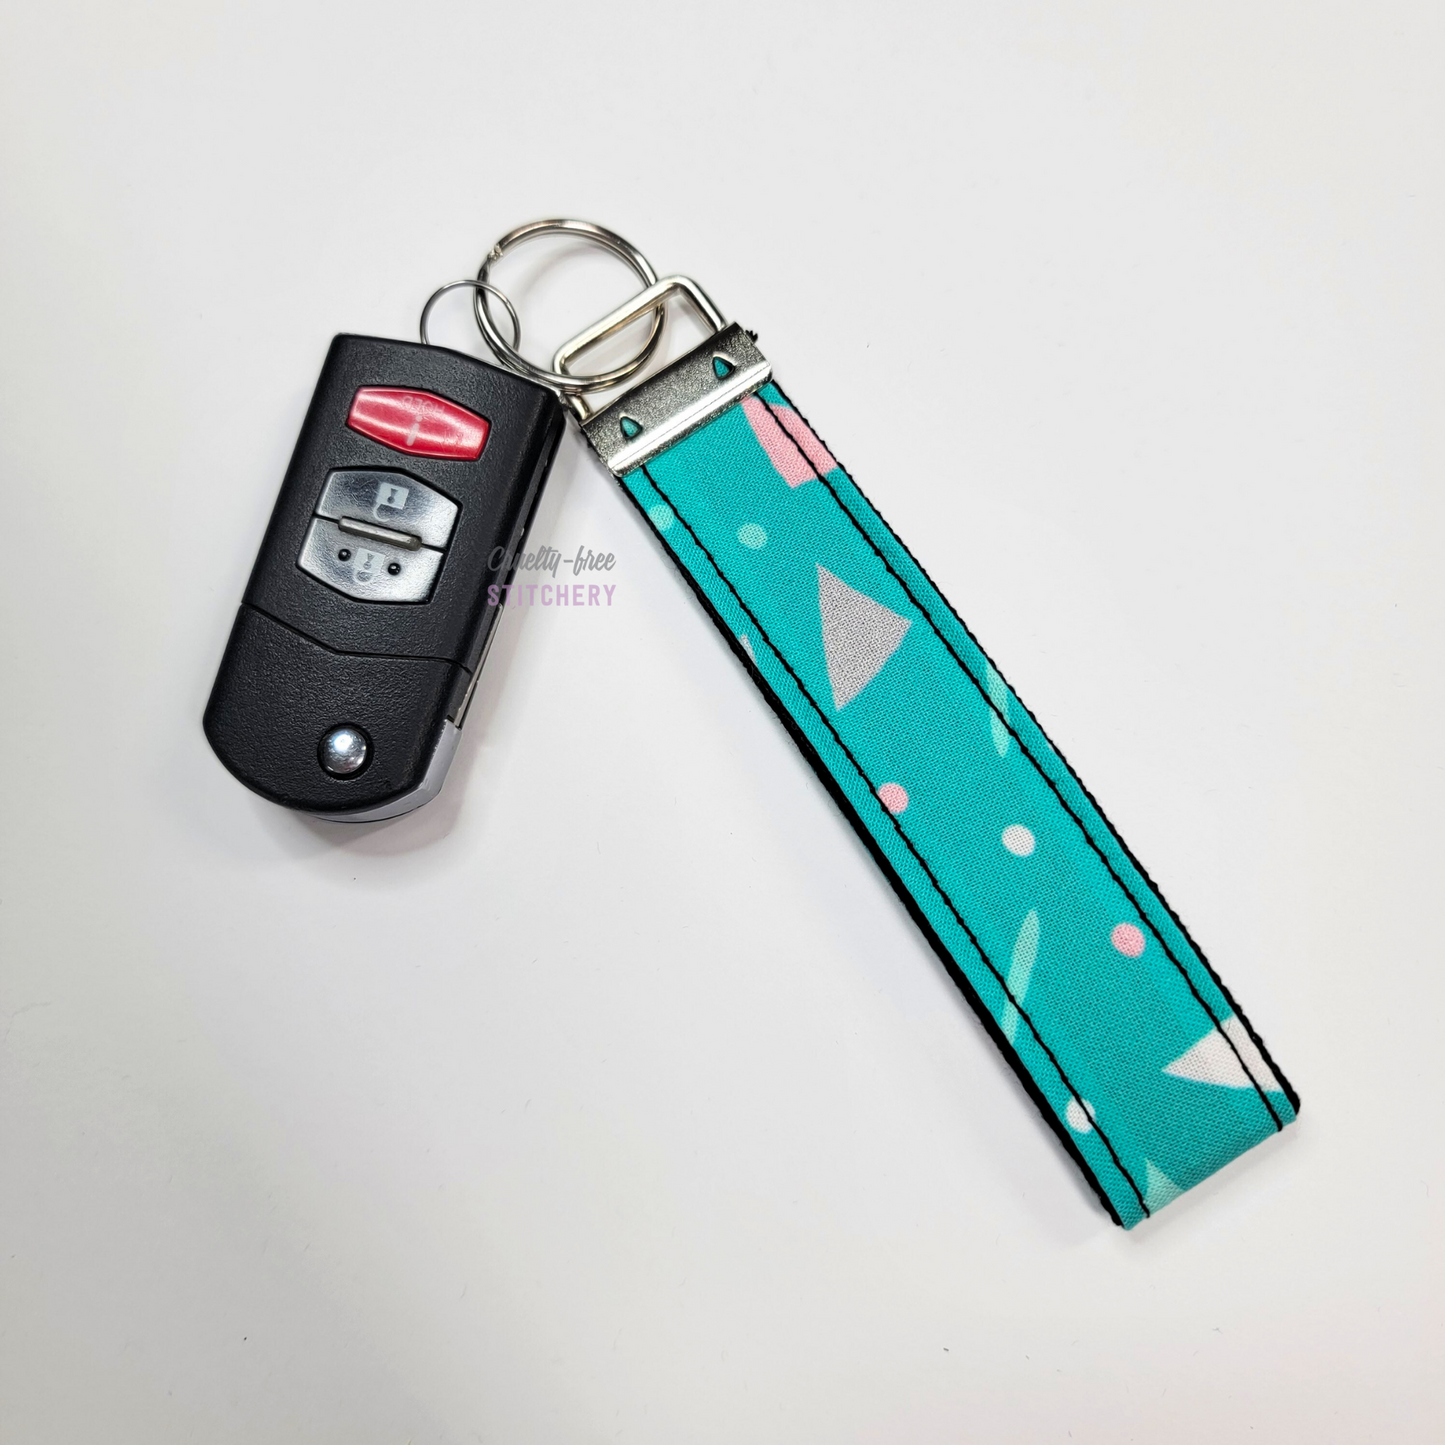 90s print key fob wristlet attached to a car key for scale. The car key is the fold-away type and is about half as long as the strap.